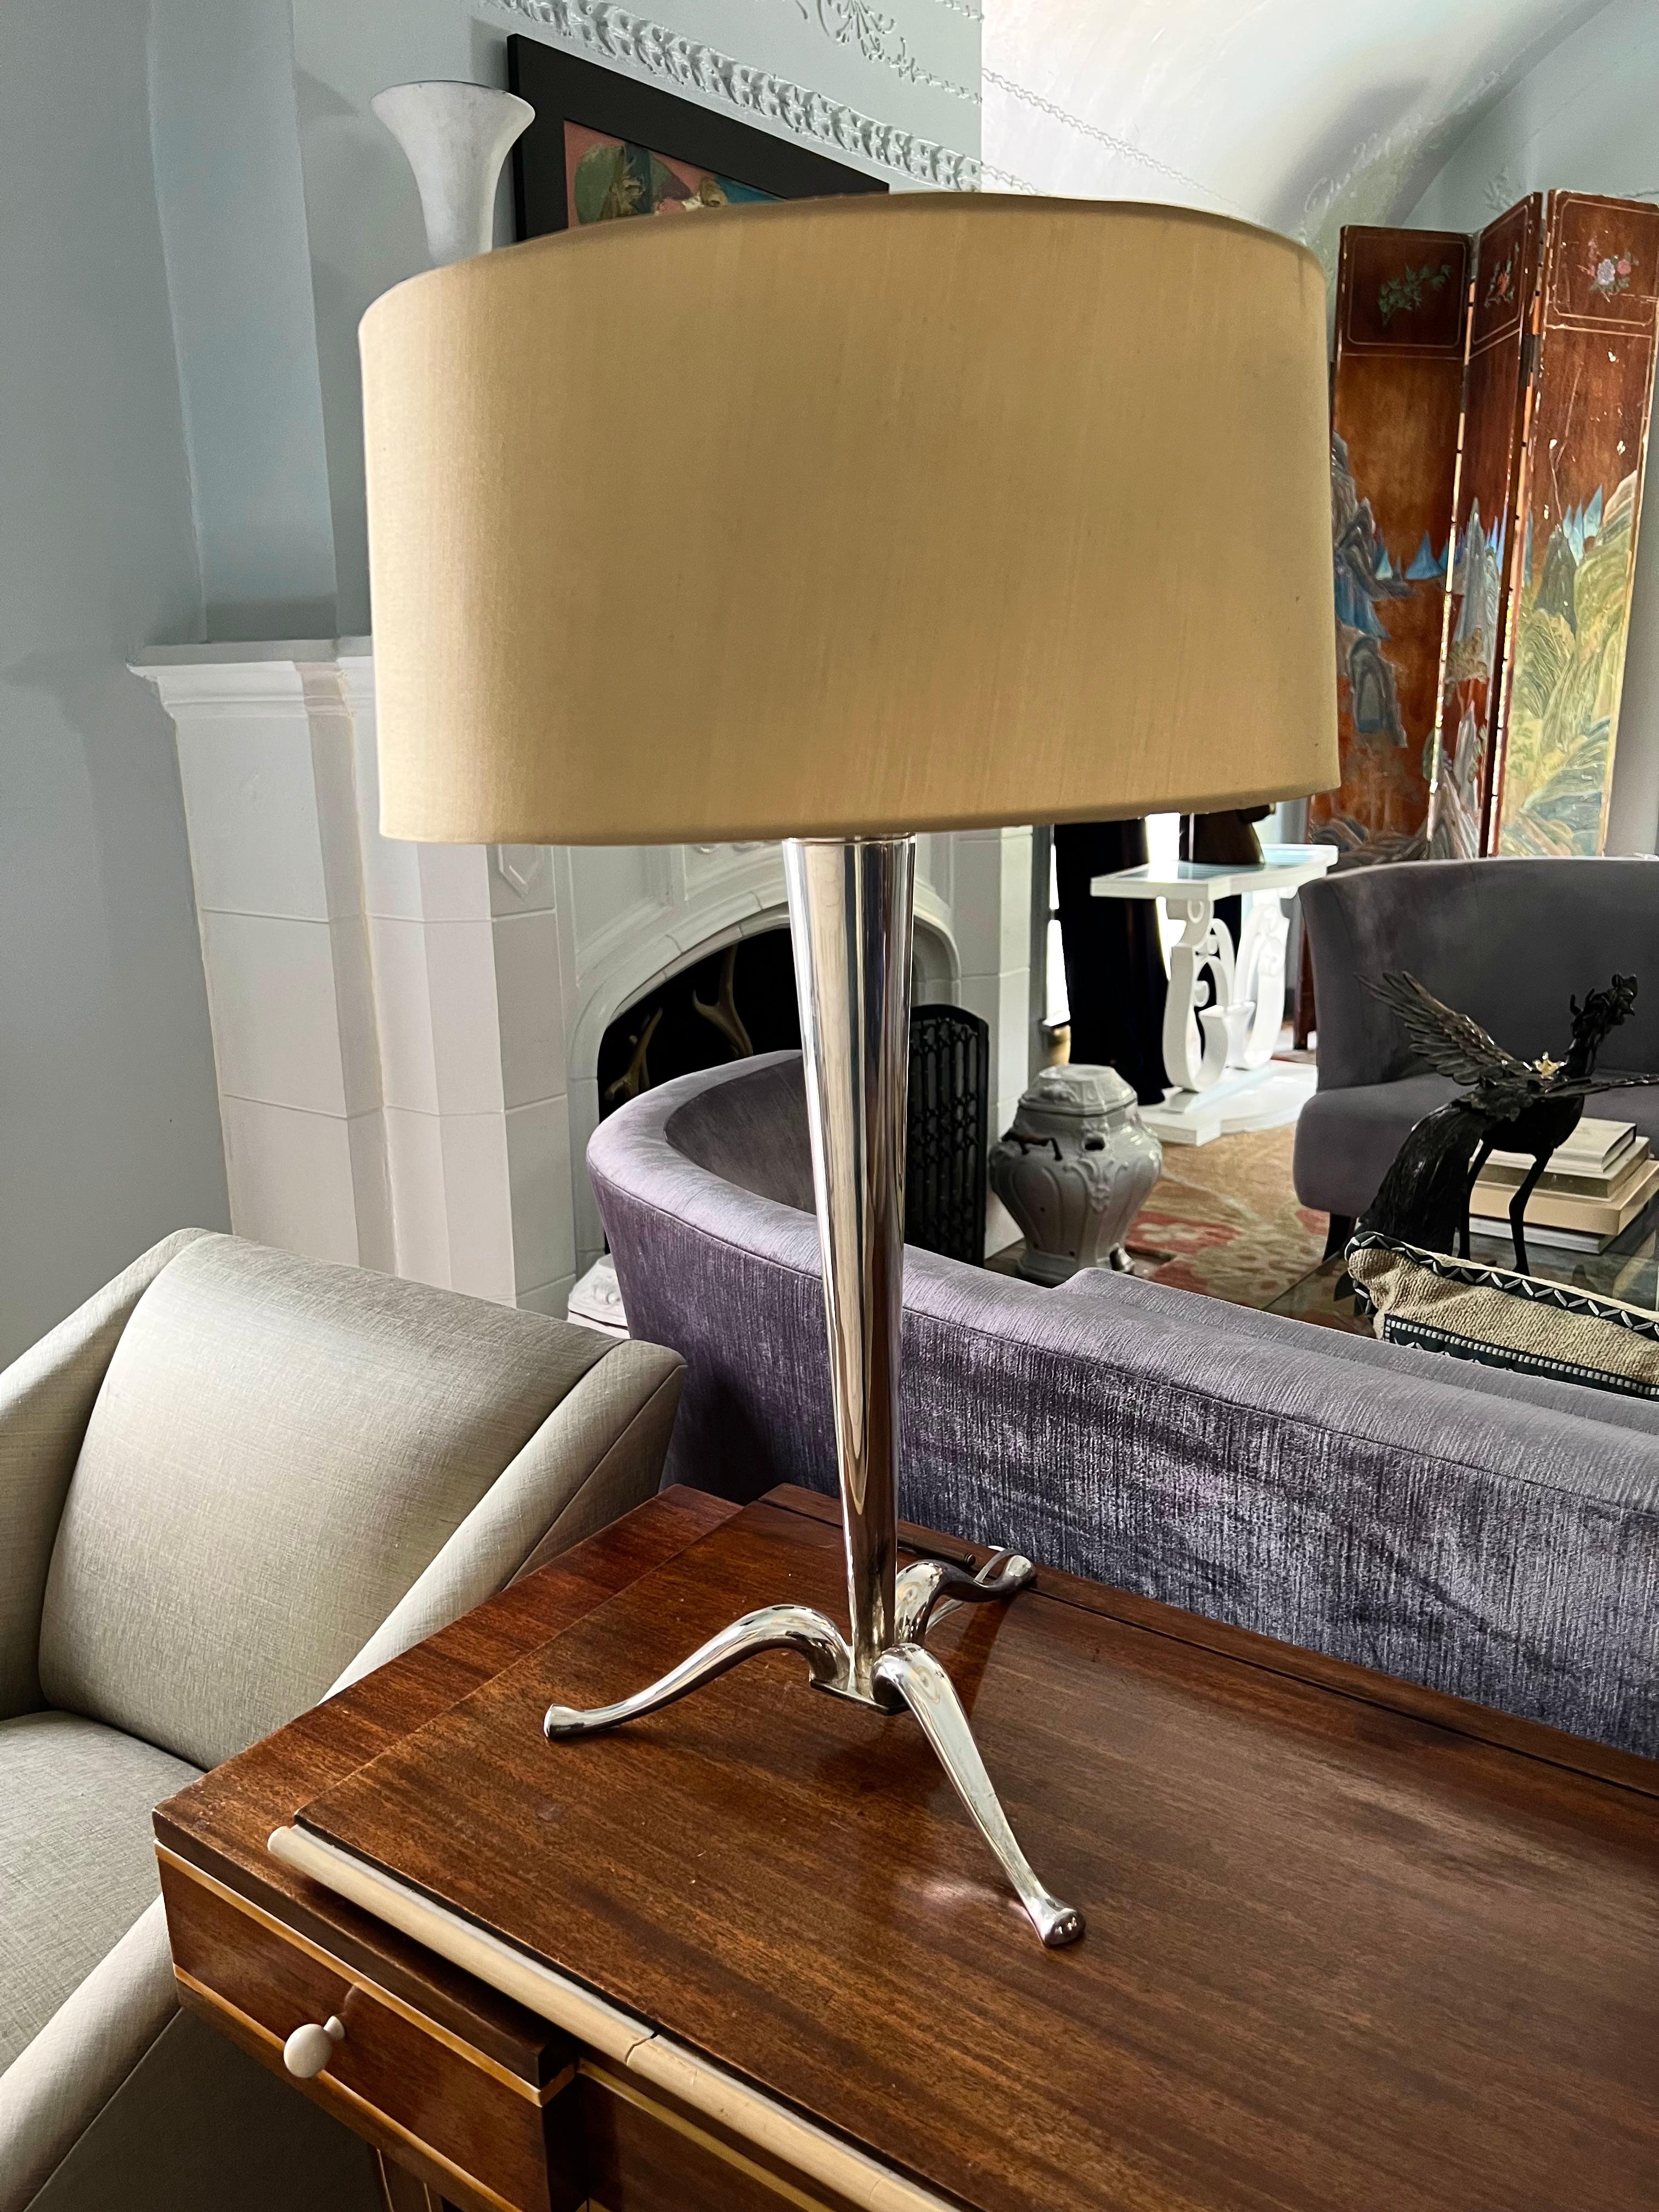 Silver plate Table lamp base - this shade is not included, but we can fabricate a shade for an additional fee. A stunning and impressive lamp for any area of the home - bedroom, guest room, living space, etc.

Tripod base is 12